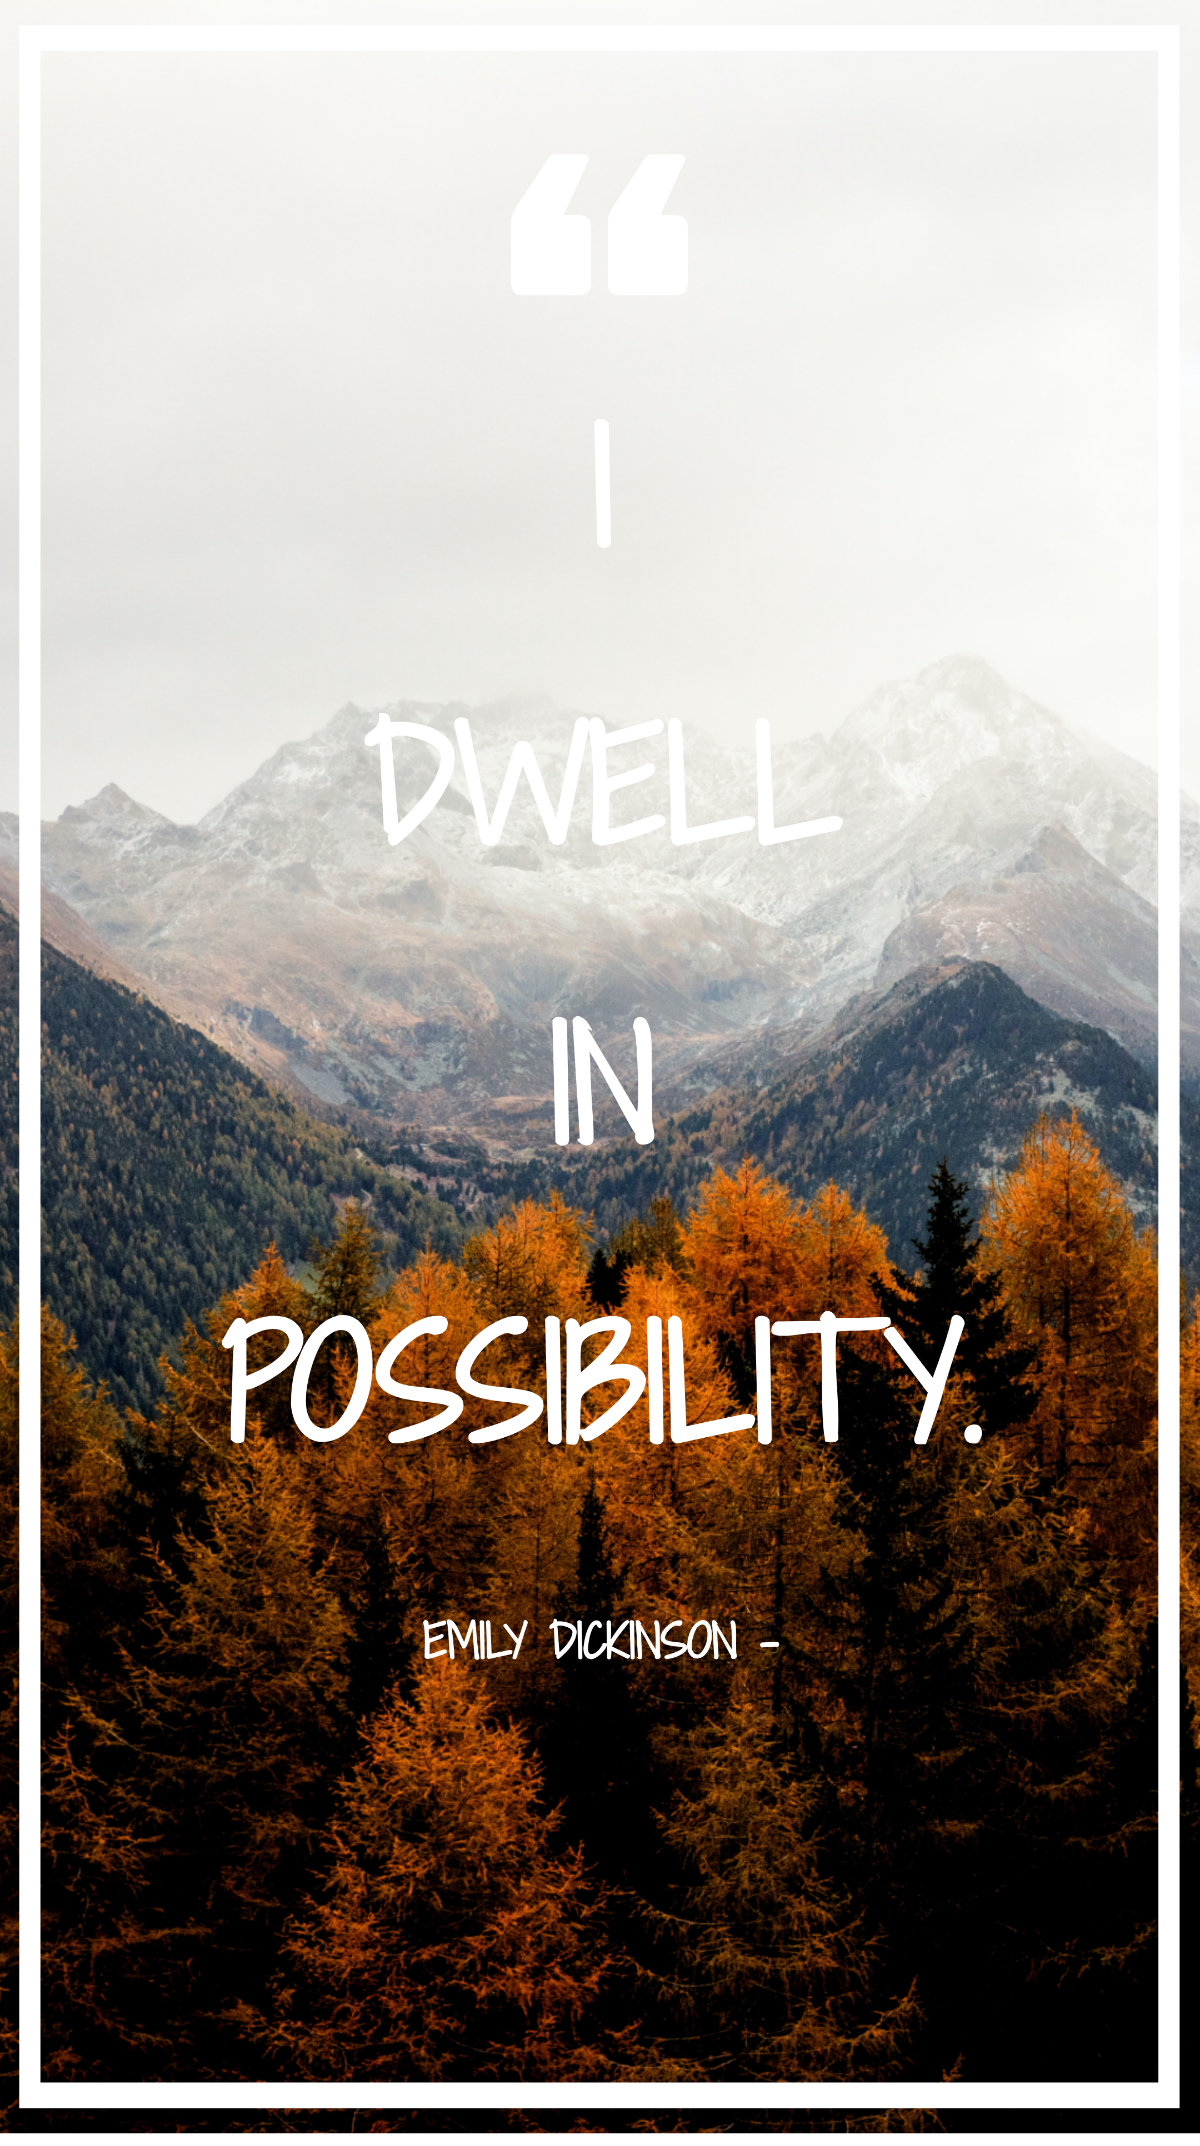 Emily Dickinson - I dwell in possibility. Template